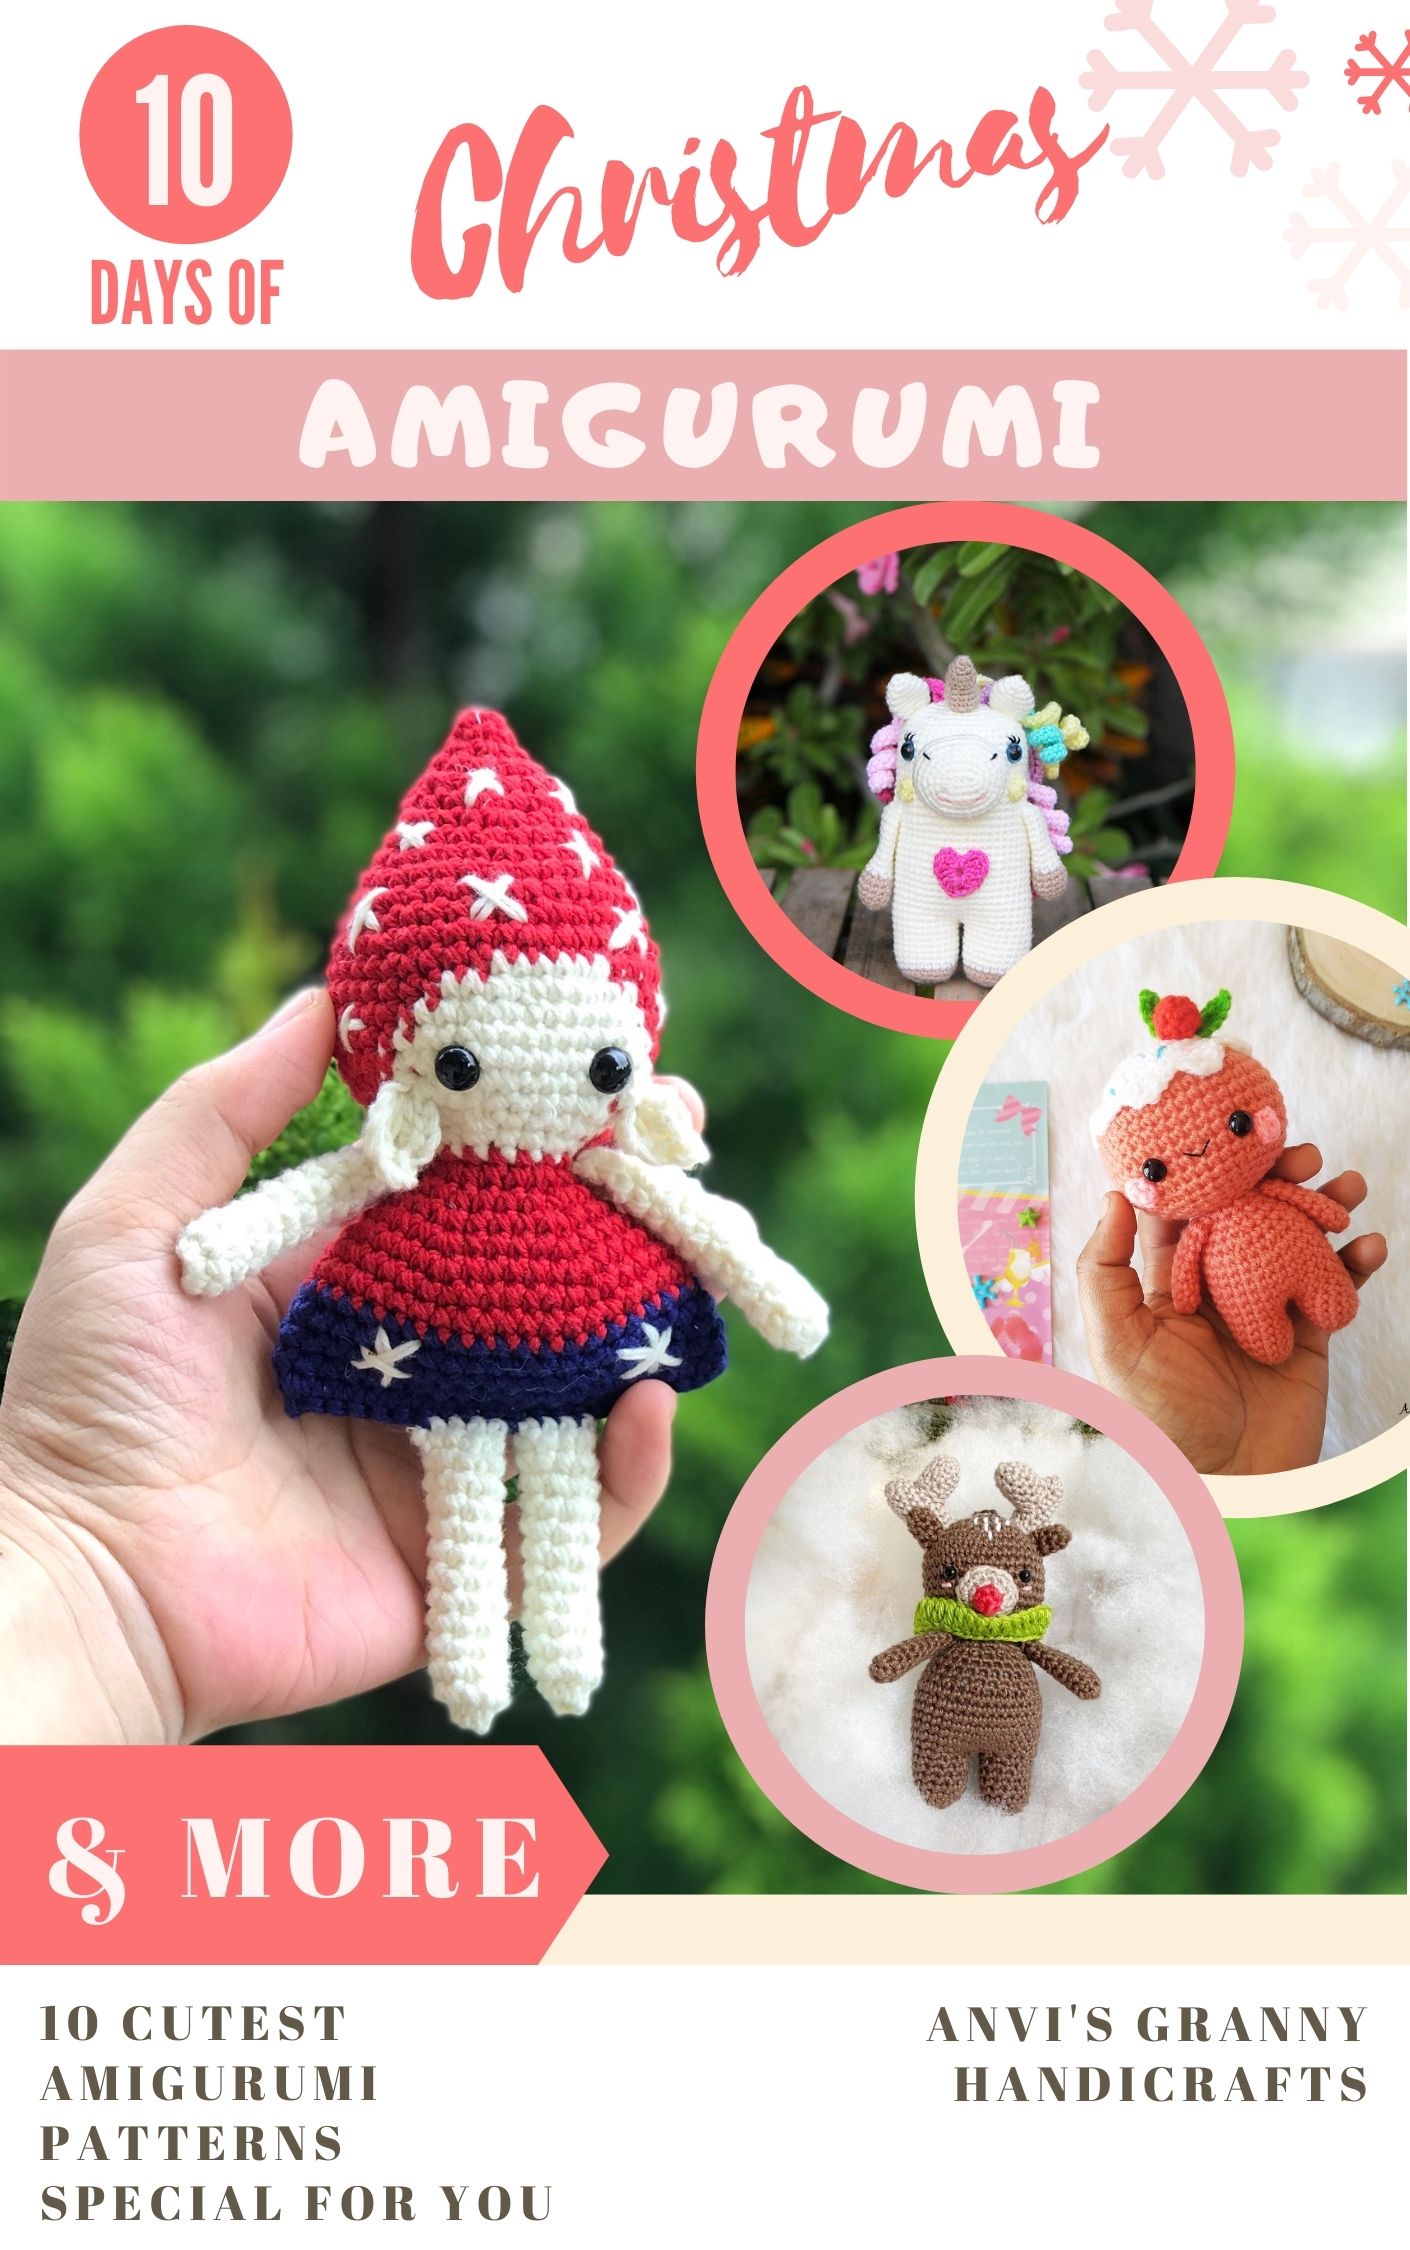 An amazing collection of crochet amigurumi patterns for Christmas! Crochet Christmas ornaments. Crochet christmas free patterns. Crochet Christmas gifts. Crochet Christmas stocking. #crochetforchristmas #christmasamigurumi #crochetornament